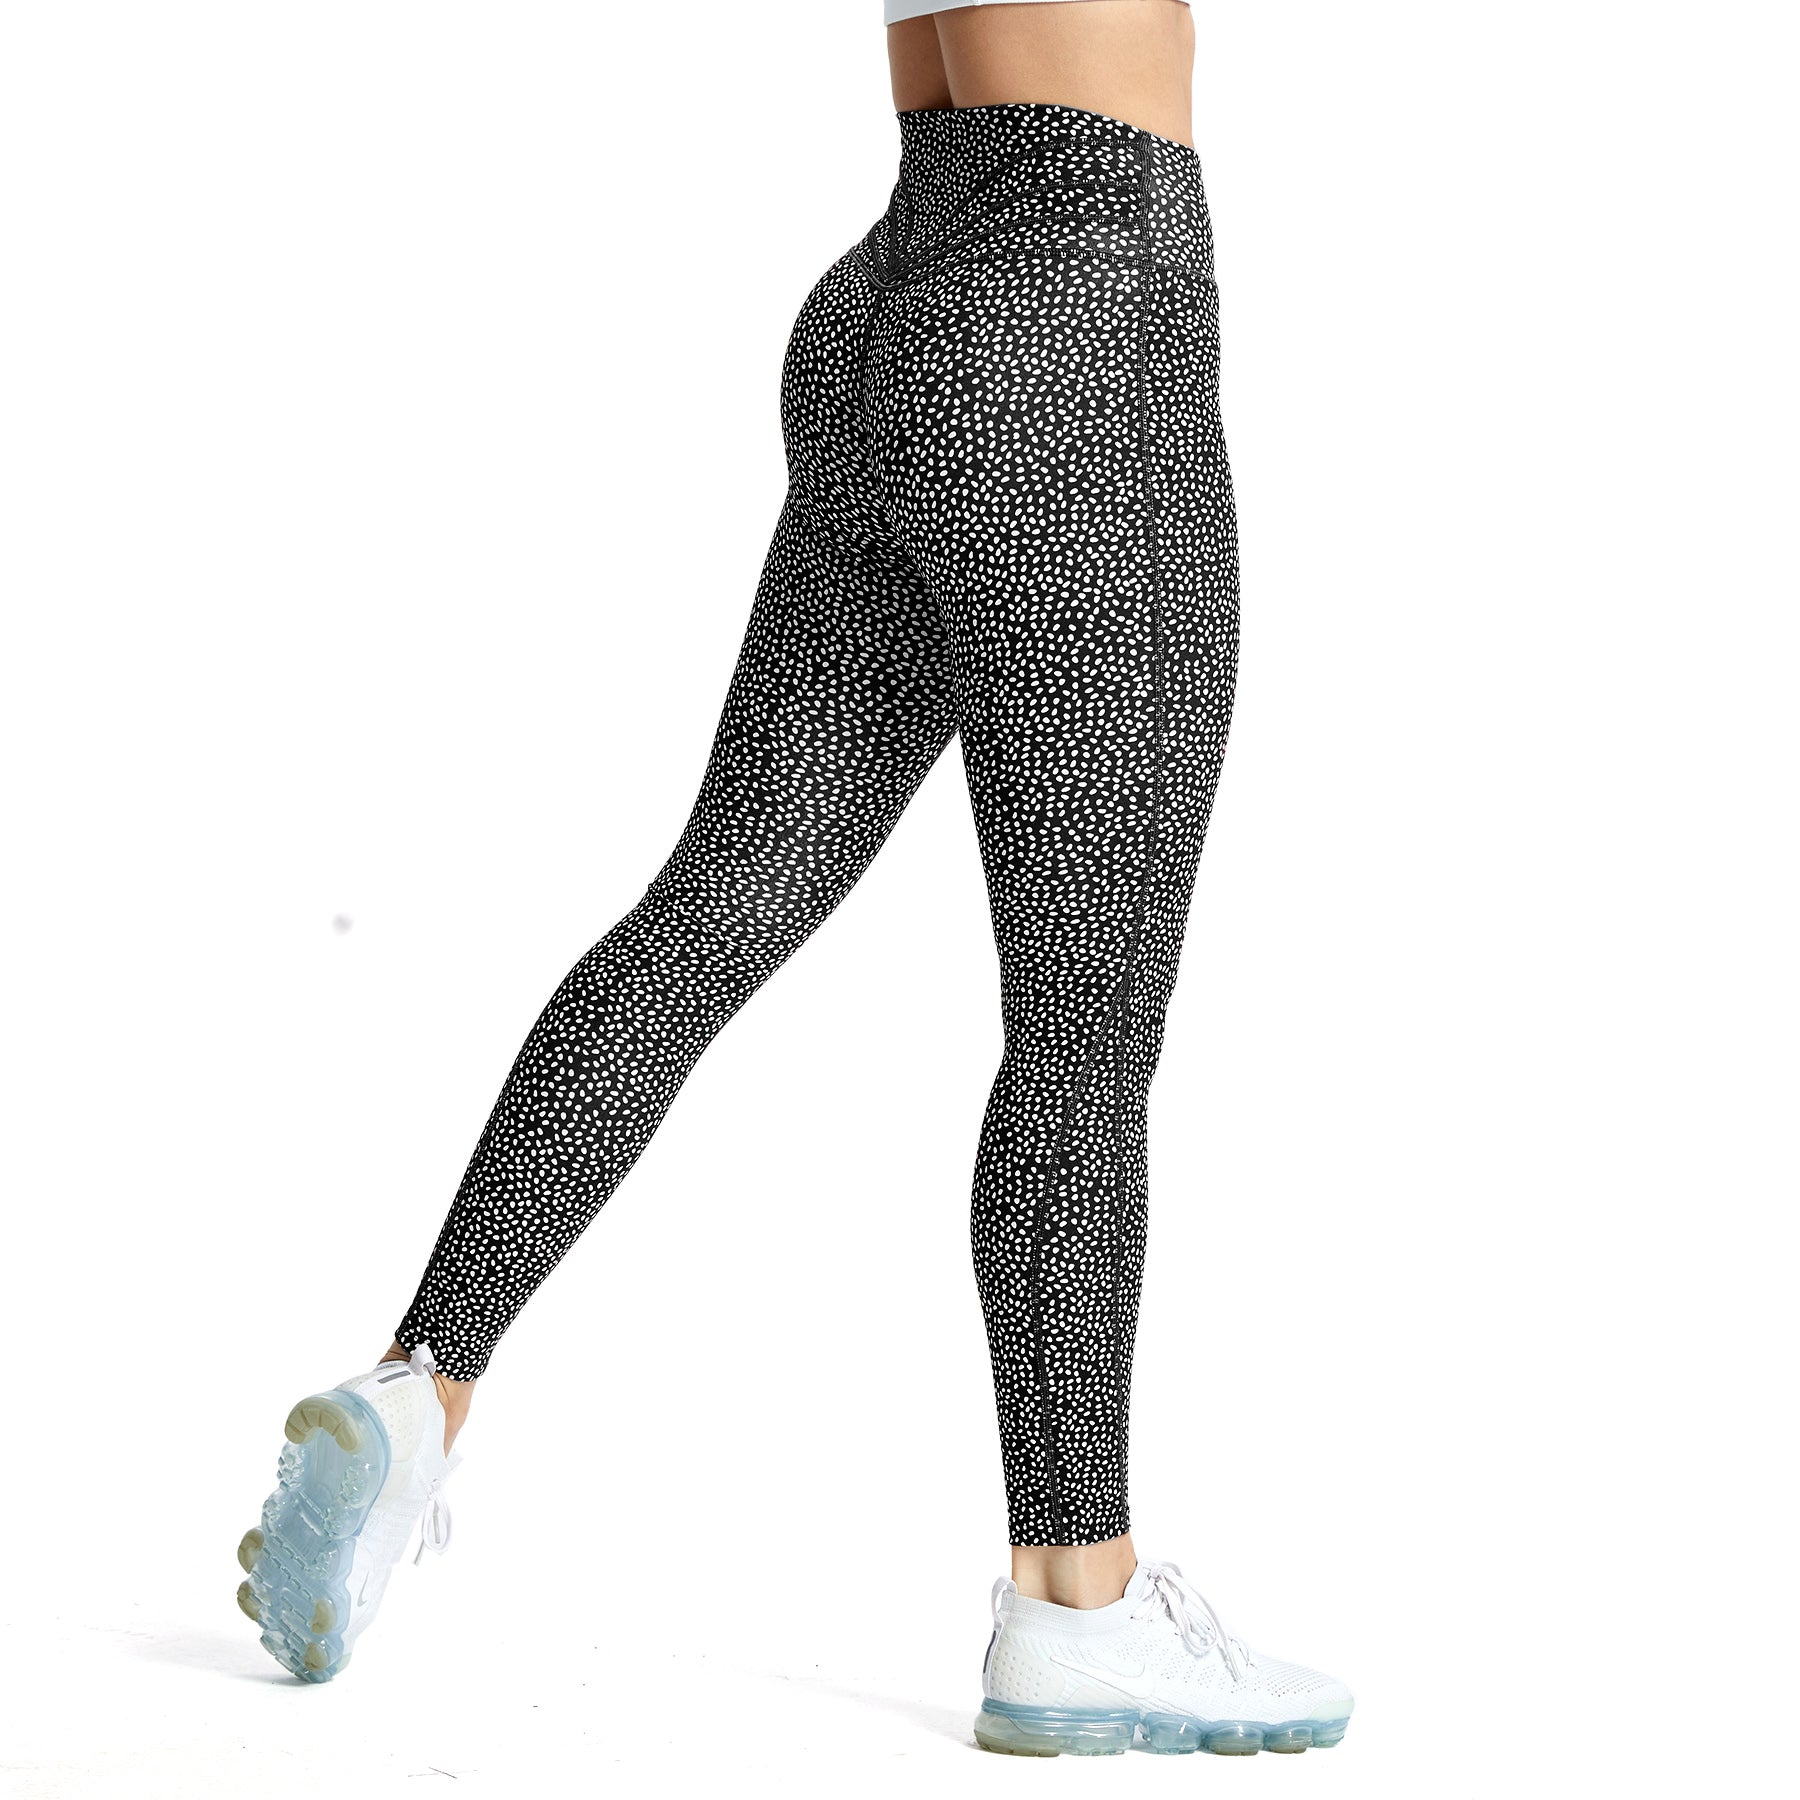 Buy Nike Women's One Luxe Tight Fit Mid Rise Cheetah Print Leggings (White/ Black, X-Small) at Amazon.in